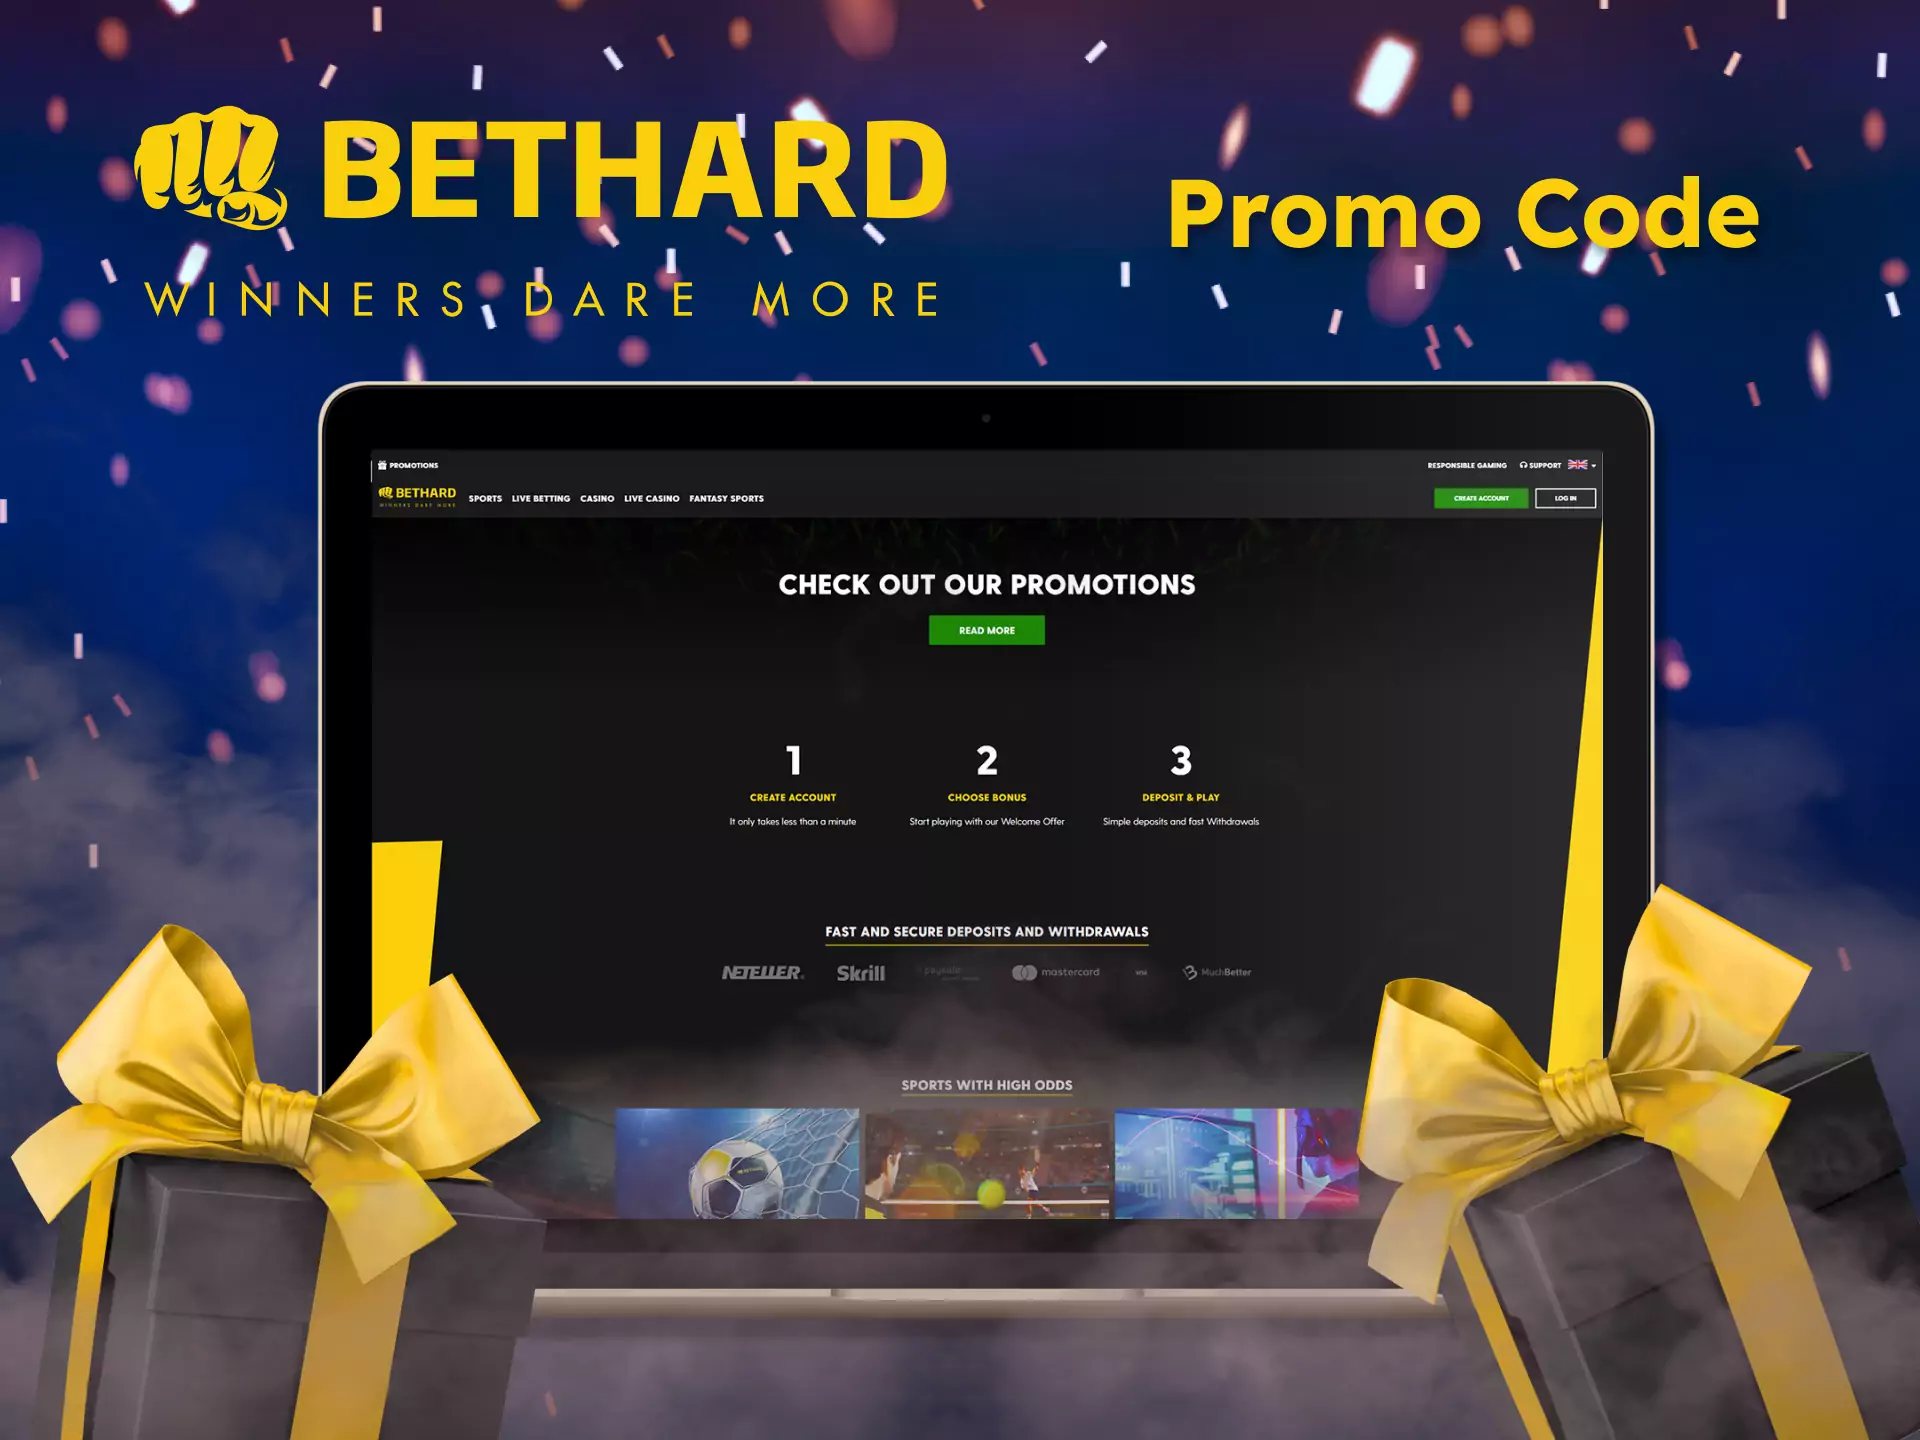 Use the special Bethard promo code and get bonuses.